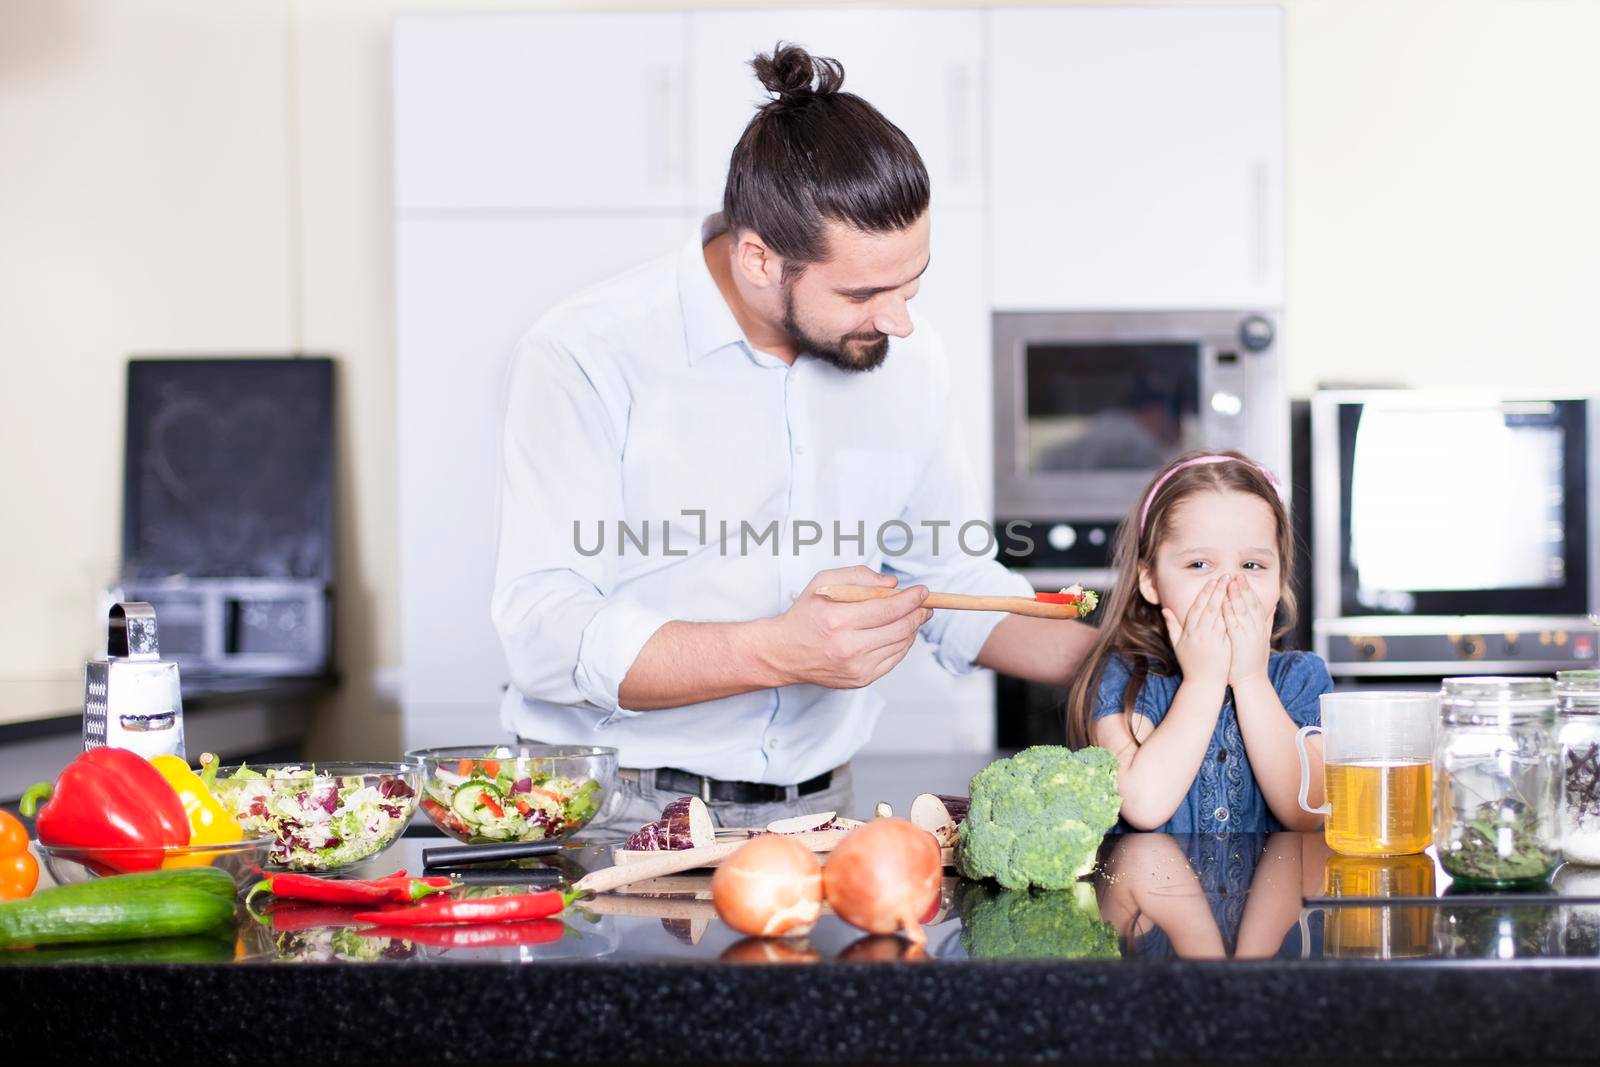 Little girl refusing to eat a salad while cooking and having lunch together in the kitchen by Jyliana